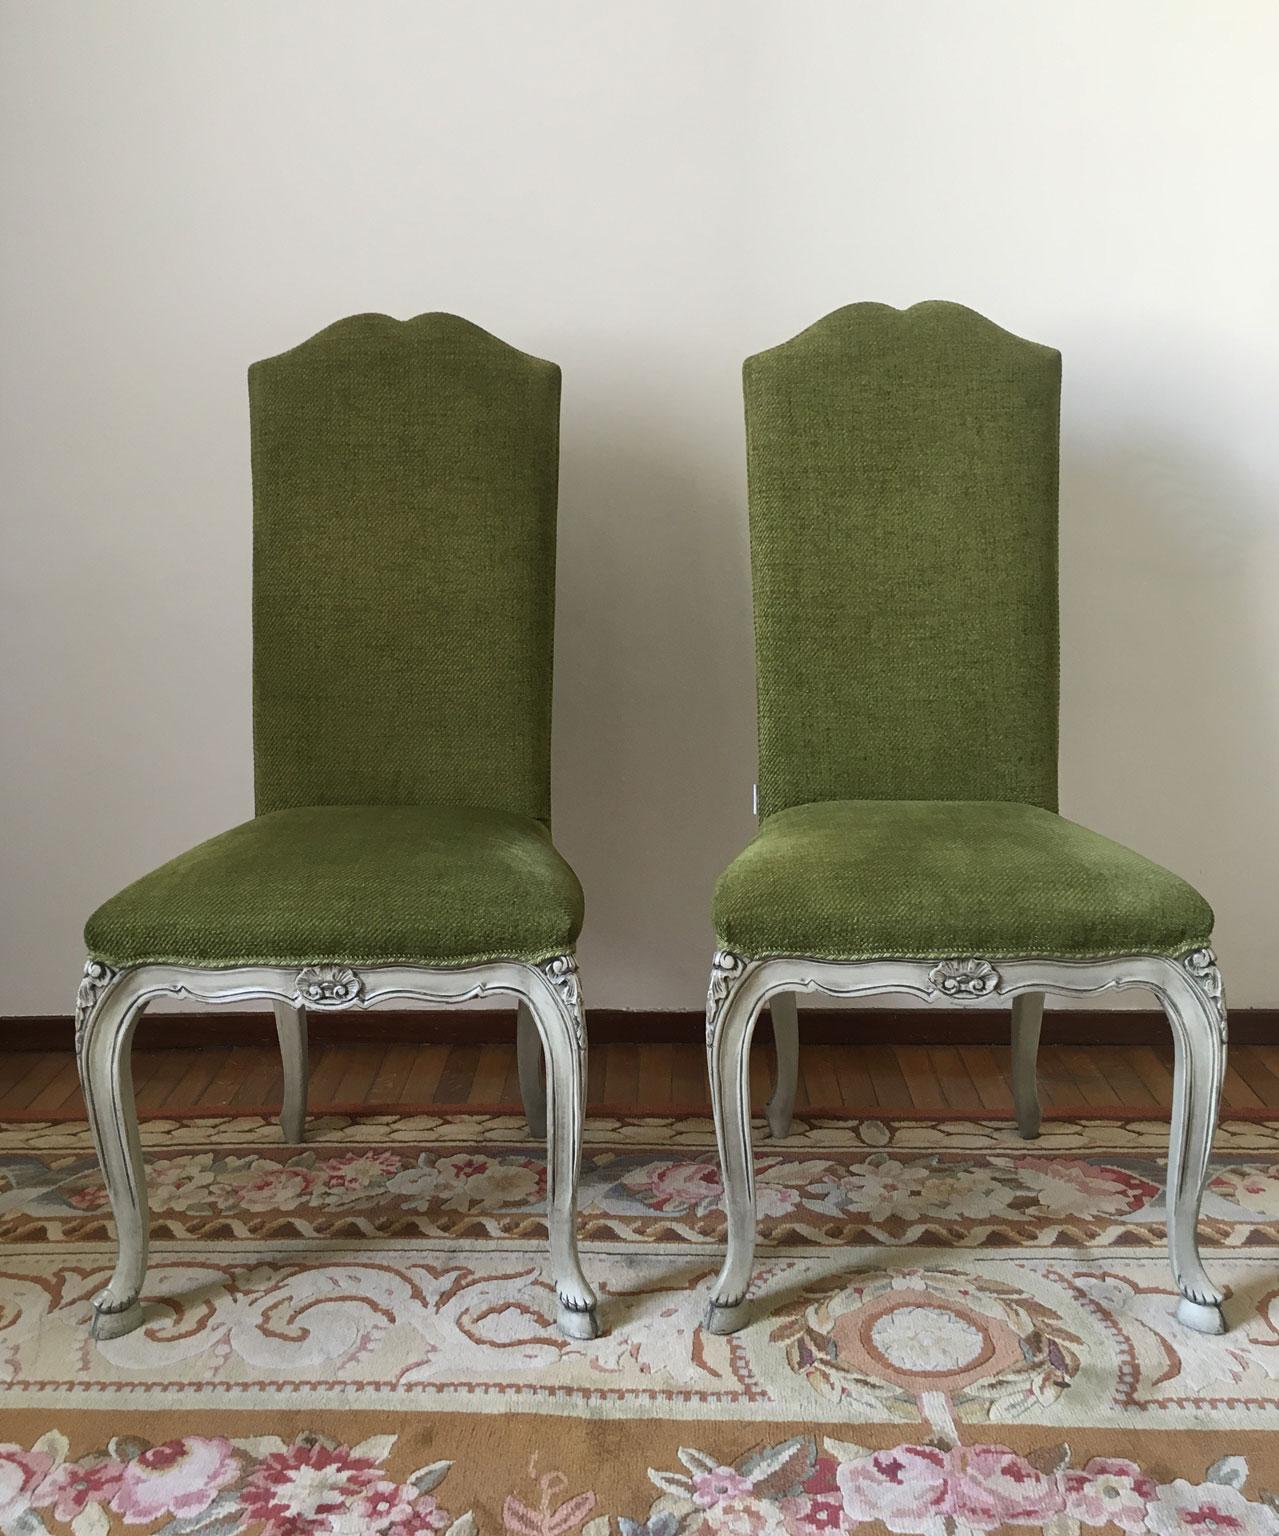 These pair of elegant French chairs,  were be upholstered in velvet. The fabric is made by Andrew Martin in London and it is a cotton velvet with diagonal weaving.The backrest is tall than standard they are always an eye-catching. 
The structure is